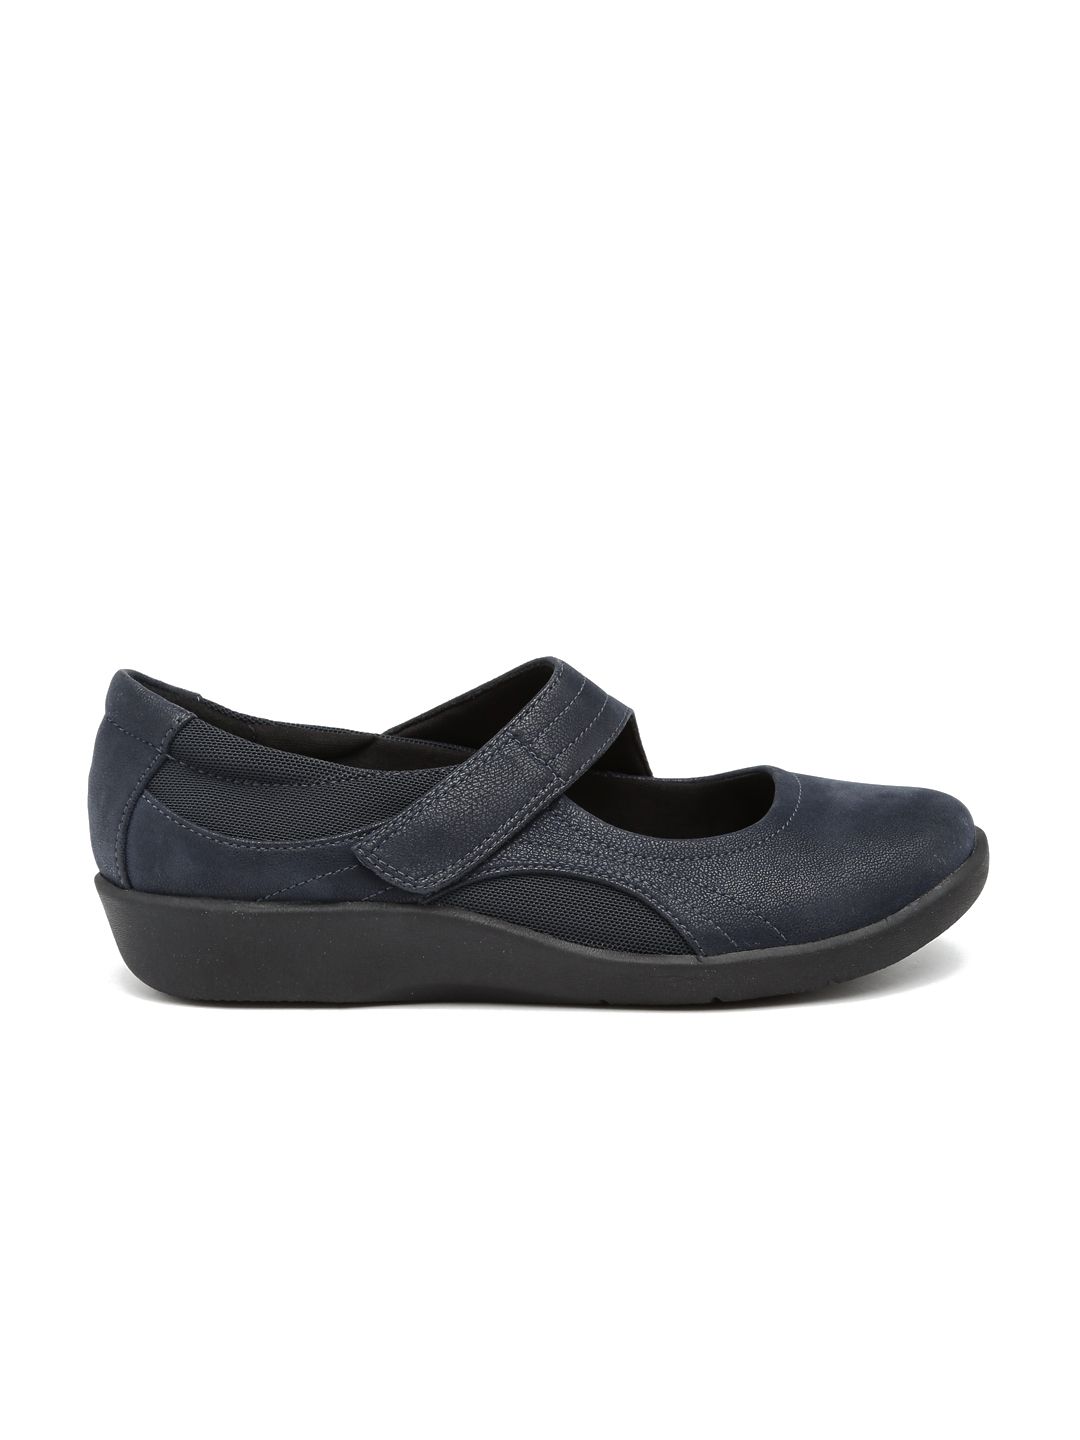 Clarks Denny Mellow Blue Belly Shoes for women - Get stylish shoes for ...